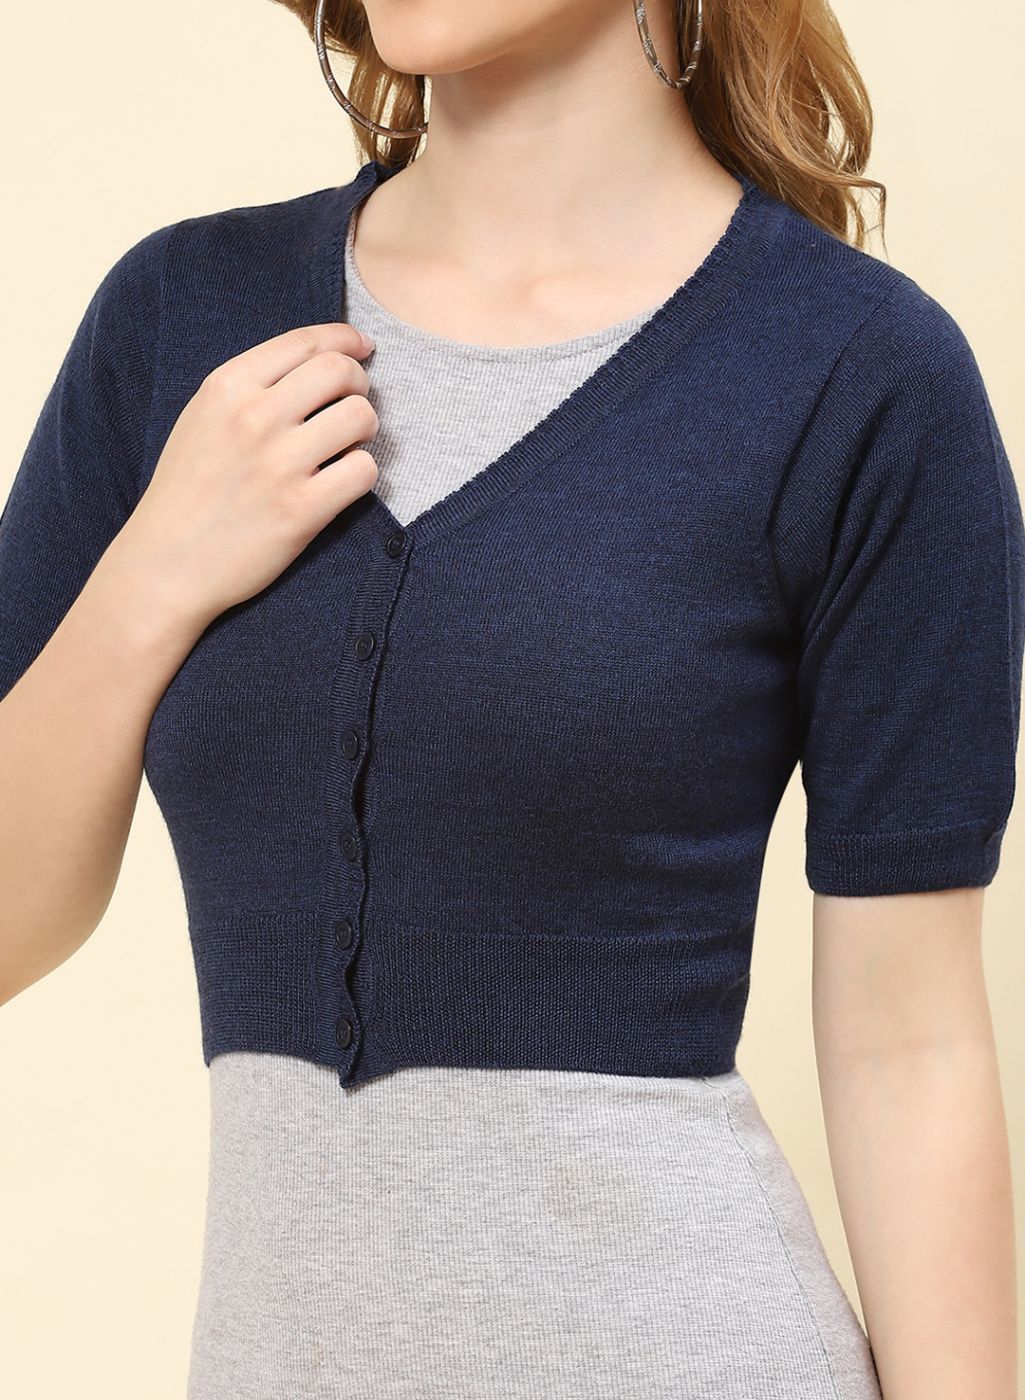 Women NAvy Blue Solid Pure wool Blouse